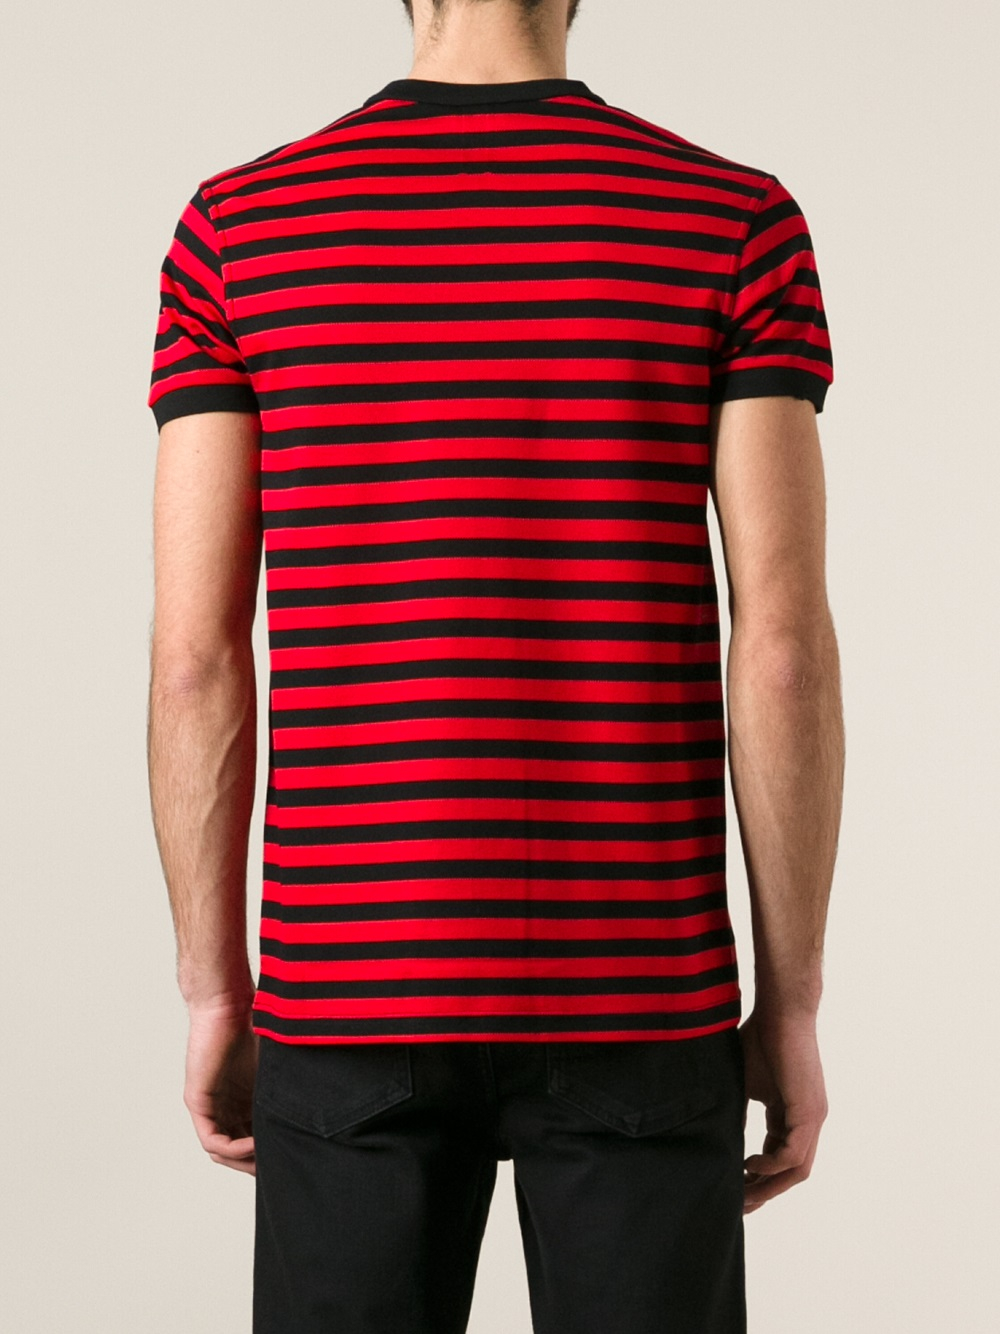 red striped t shirt mens